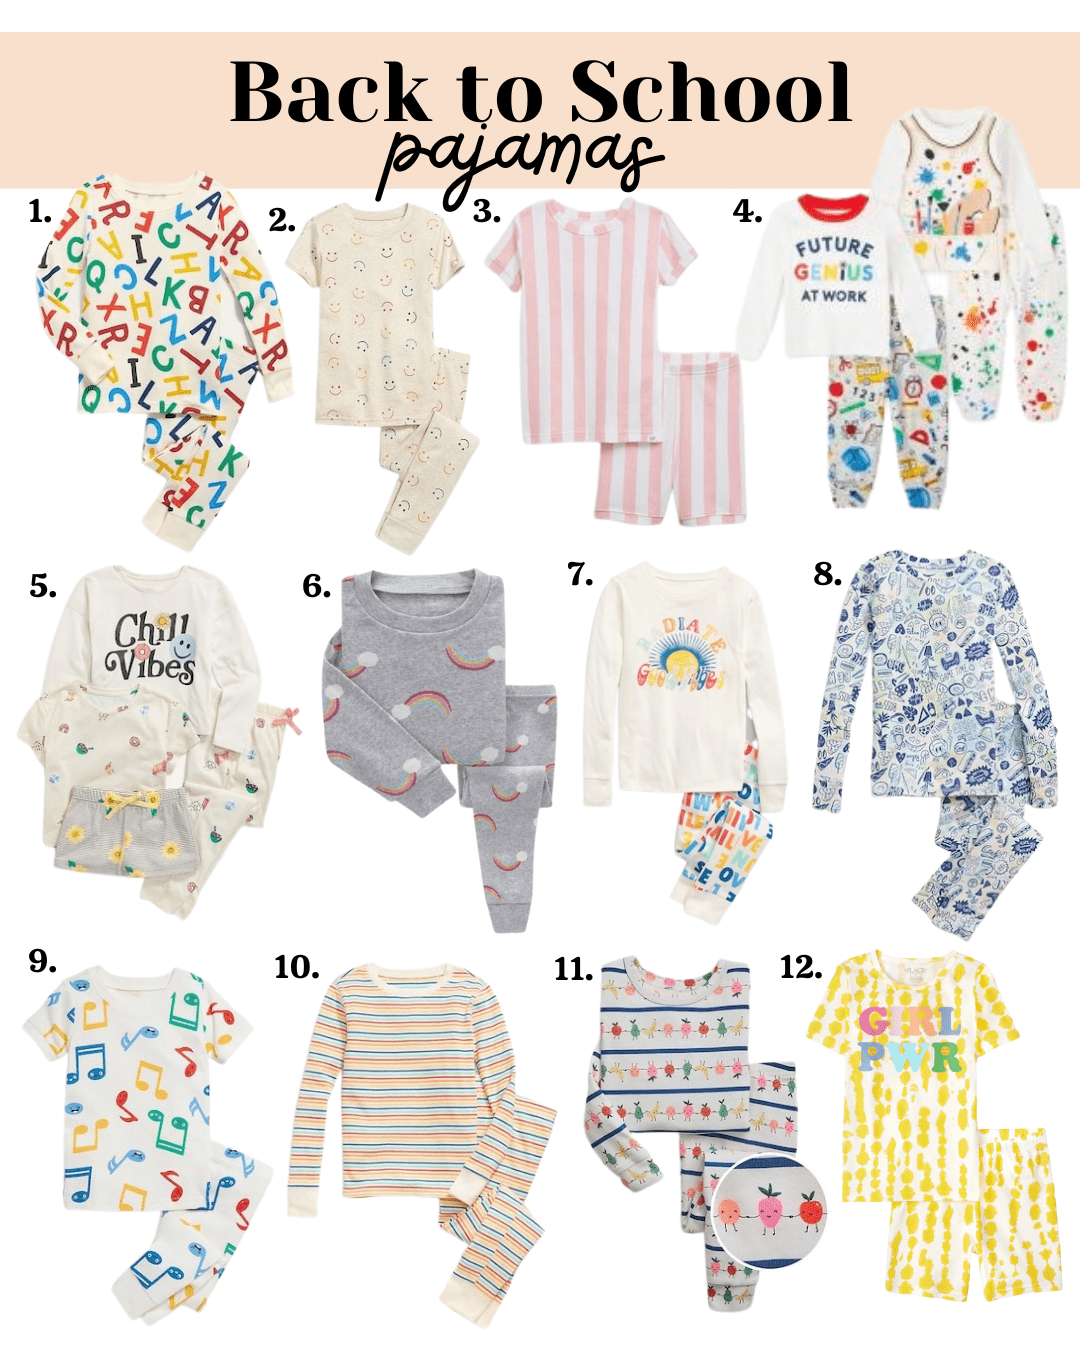 Back To School Pajamas for girls